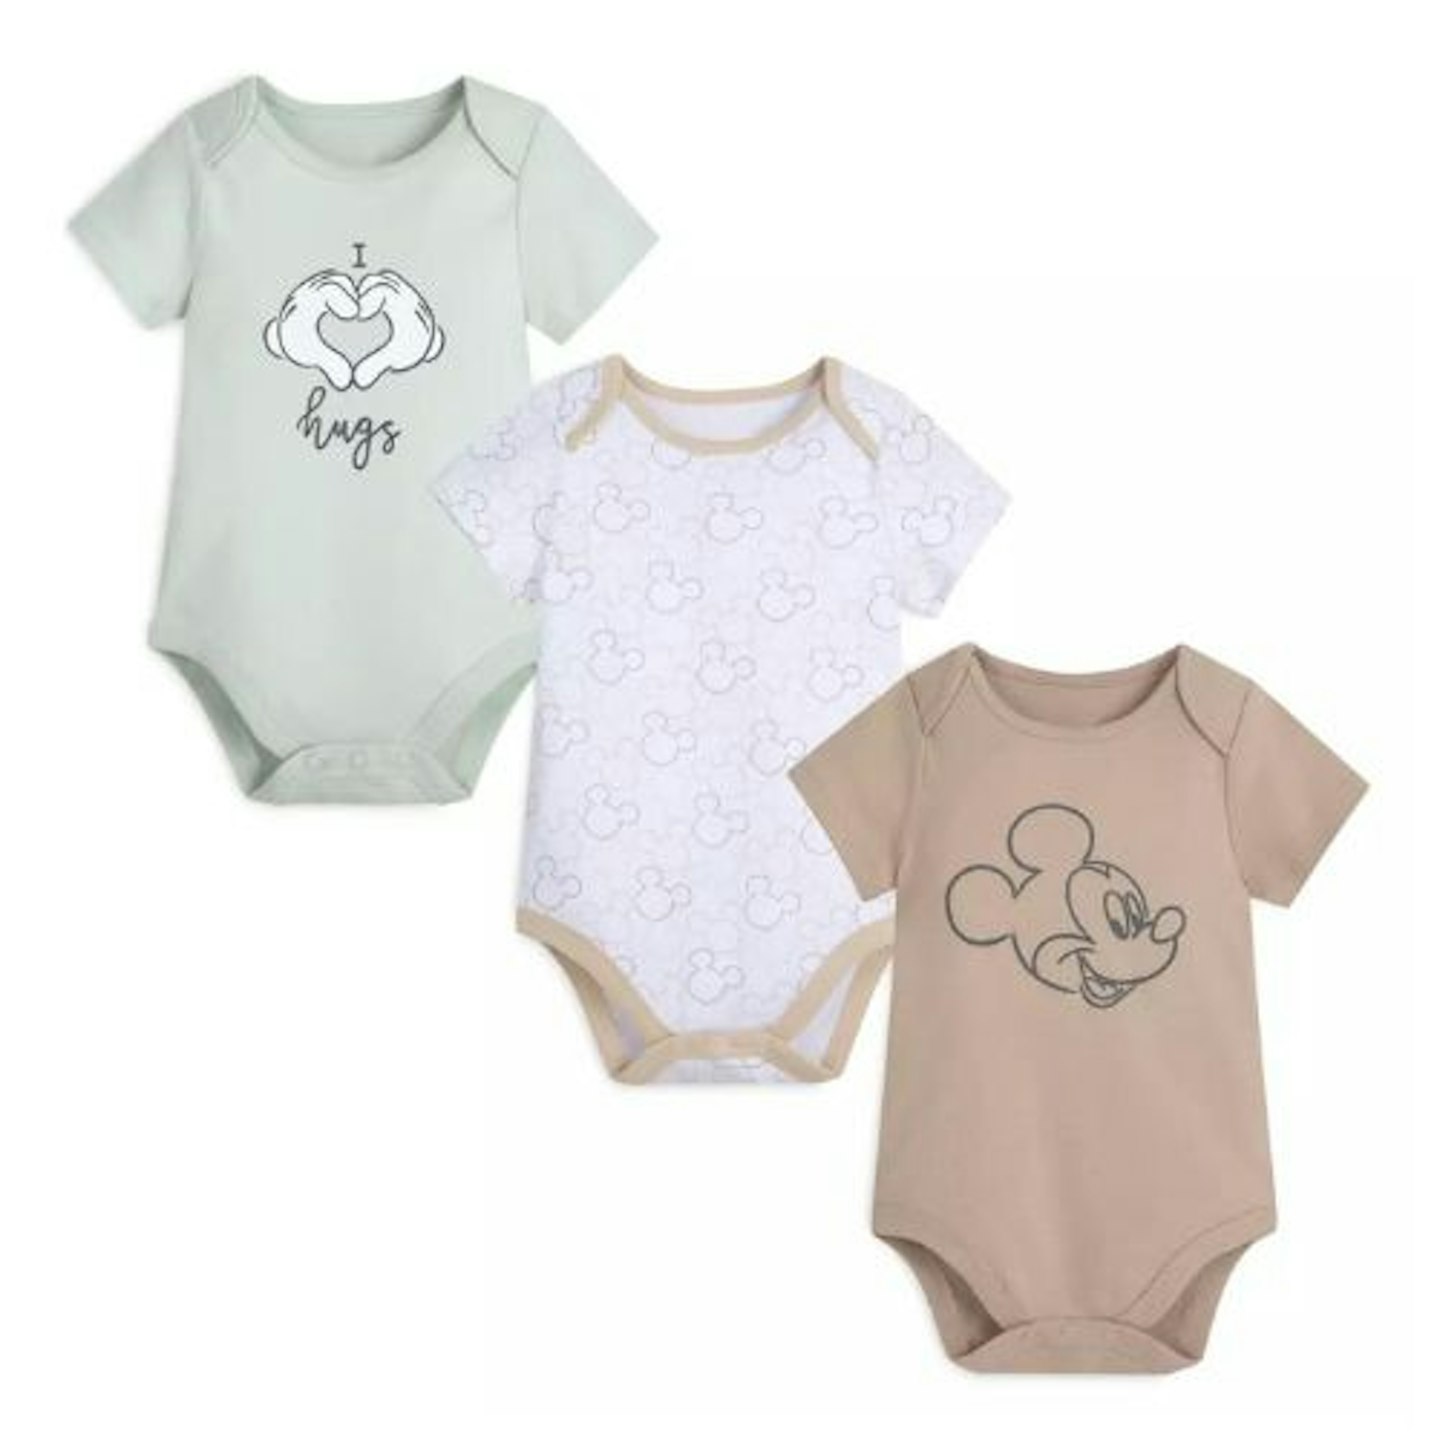 Best Disney clothes for baby Mickey Mouse Short Sleeve Baby Bodysuit Set